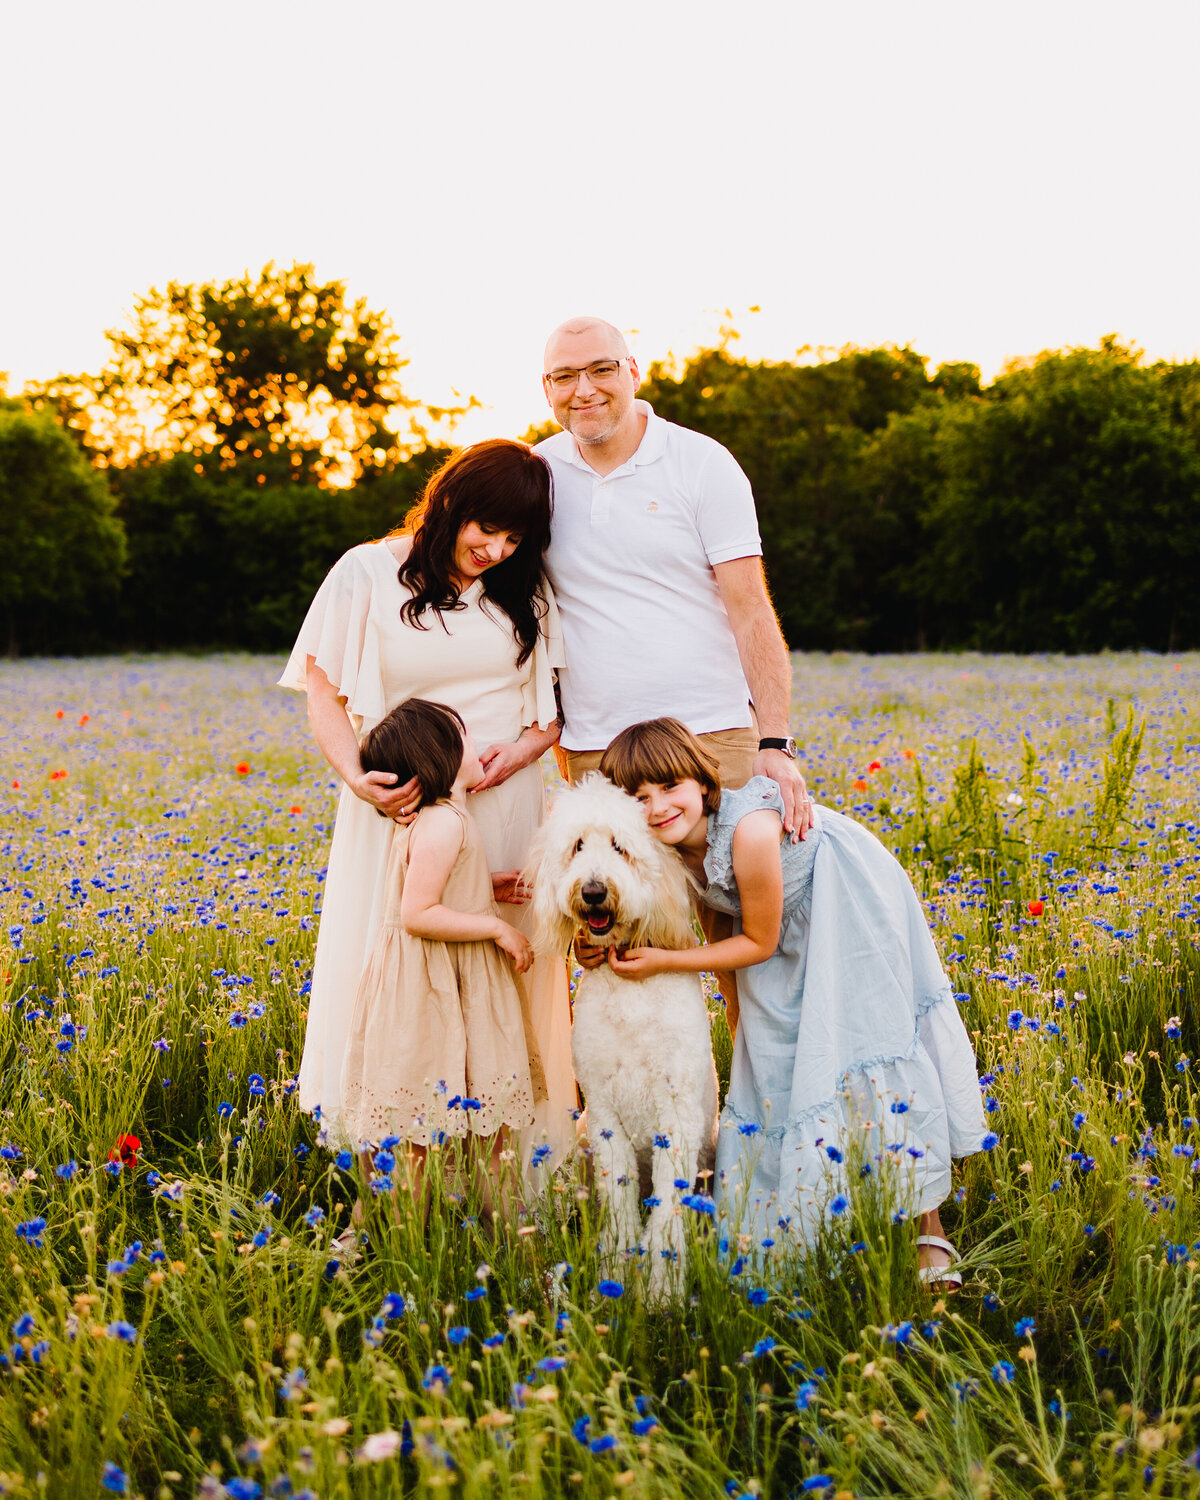 Custom family photography in Albuquerque features a heartwarming garden scene with vibrant purple and red flowers. The girl in a blue dress is affectionately hugging a white dog, while the woman gazes lovingly at a smaller girl in a light pink dress.